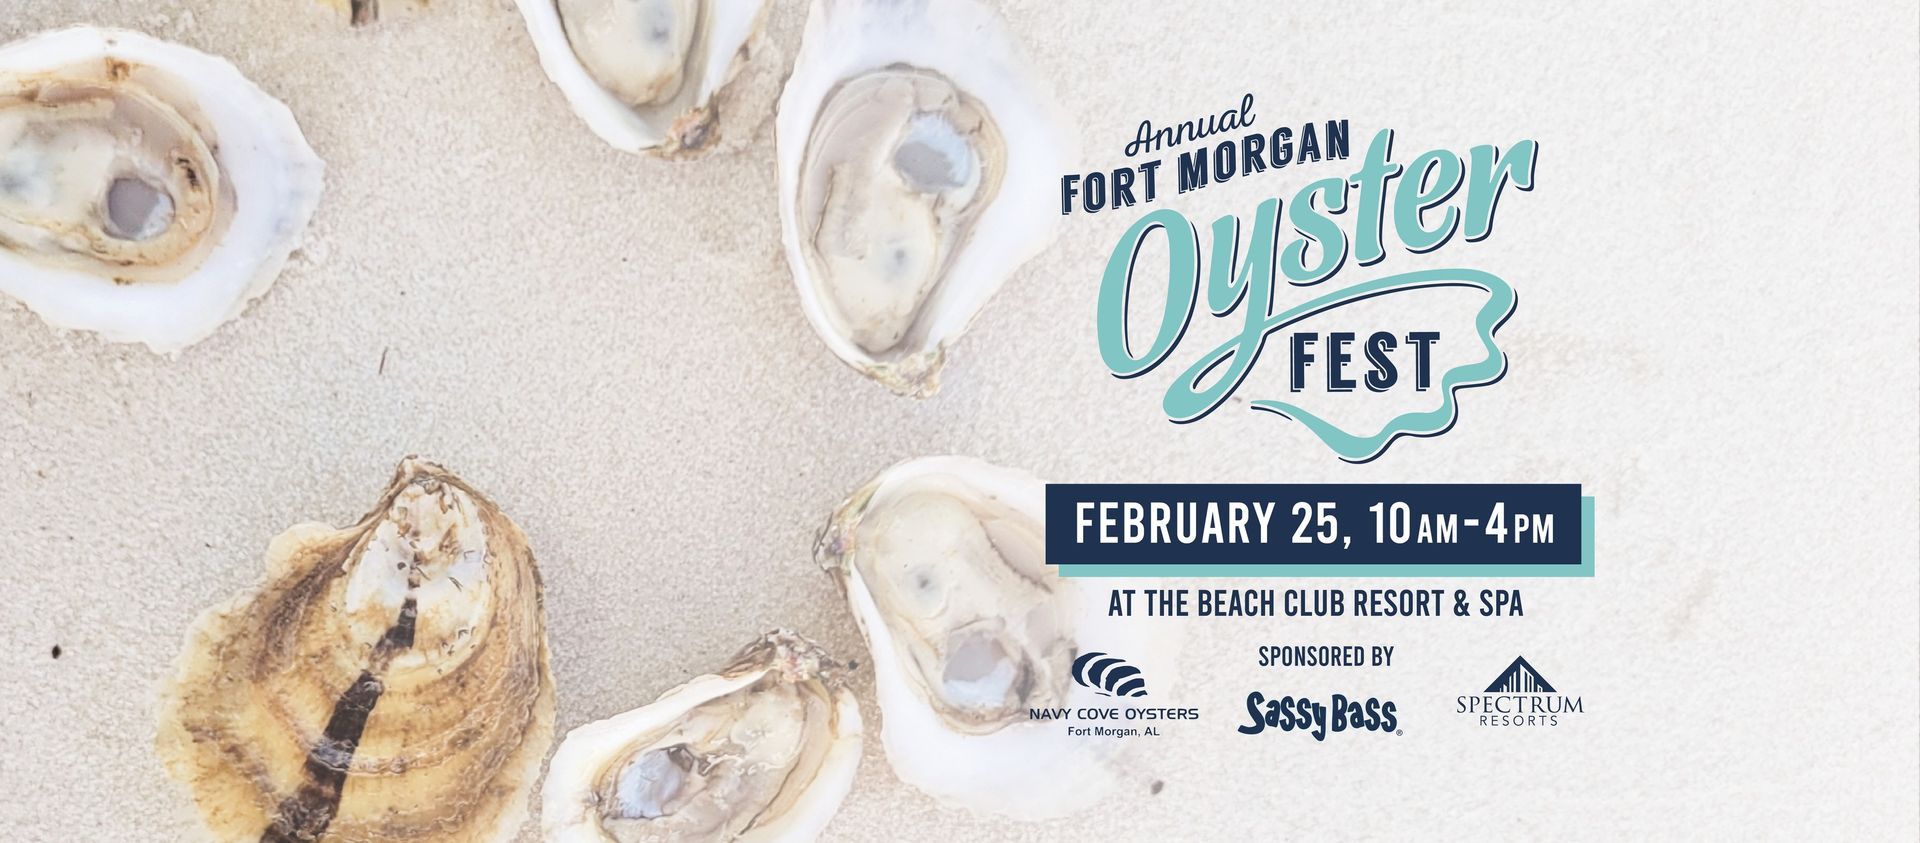 The FortMorgan, Alabama, Oyster Fest is Saturday, Feb. 25, from 10 a.m.-4 p.m.